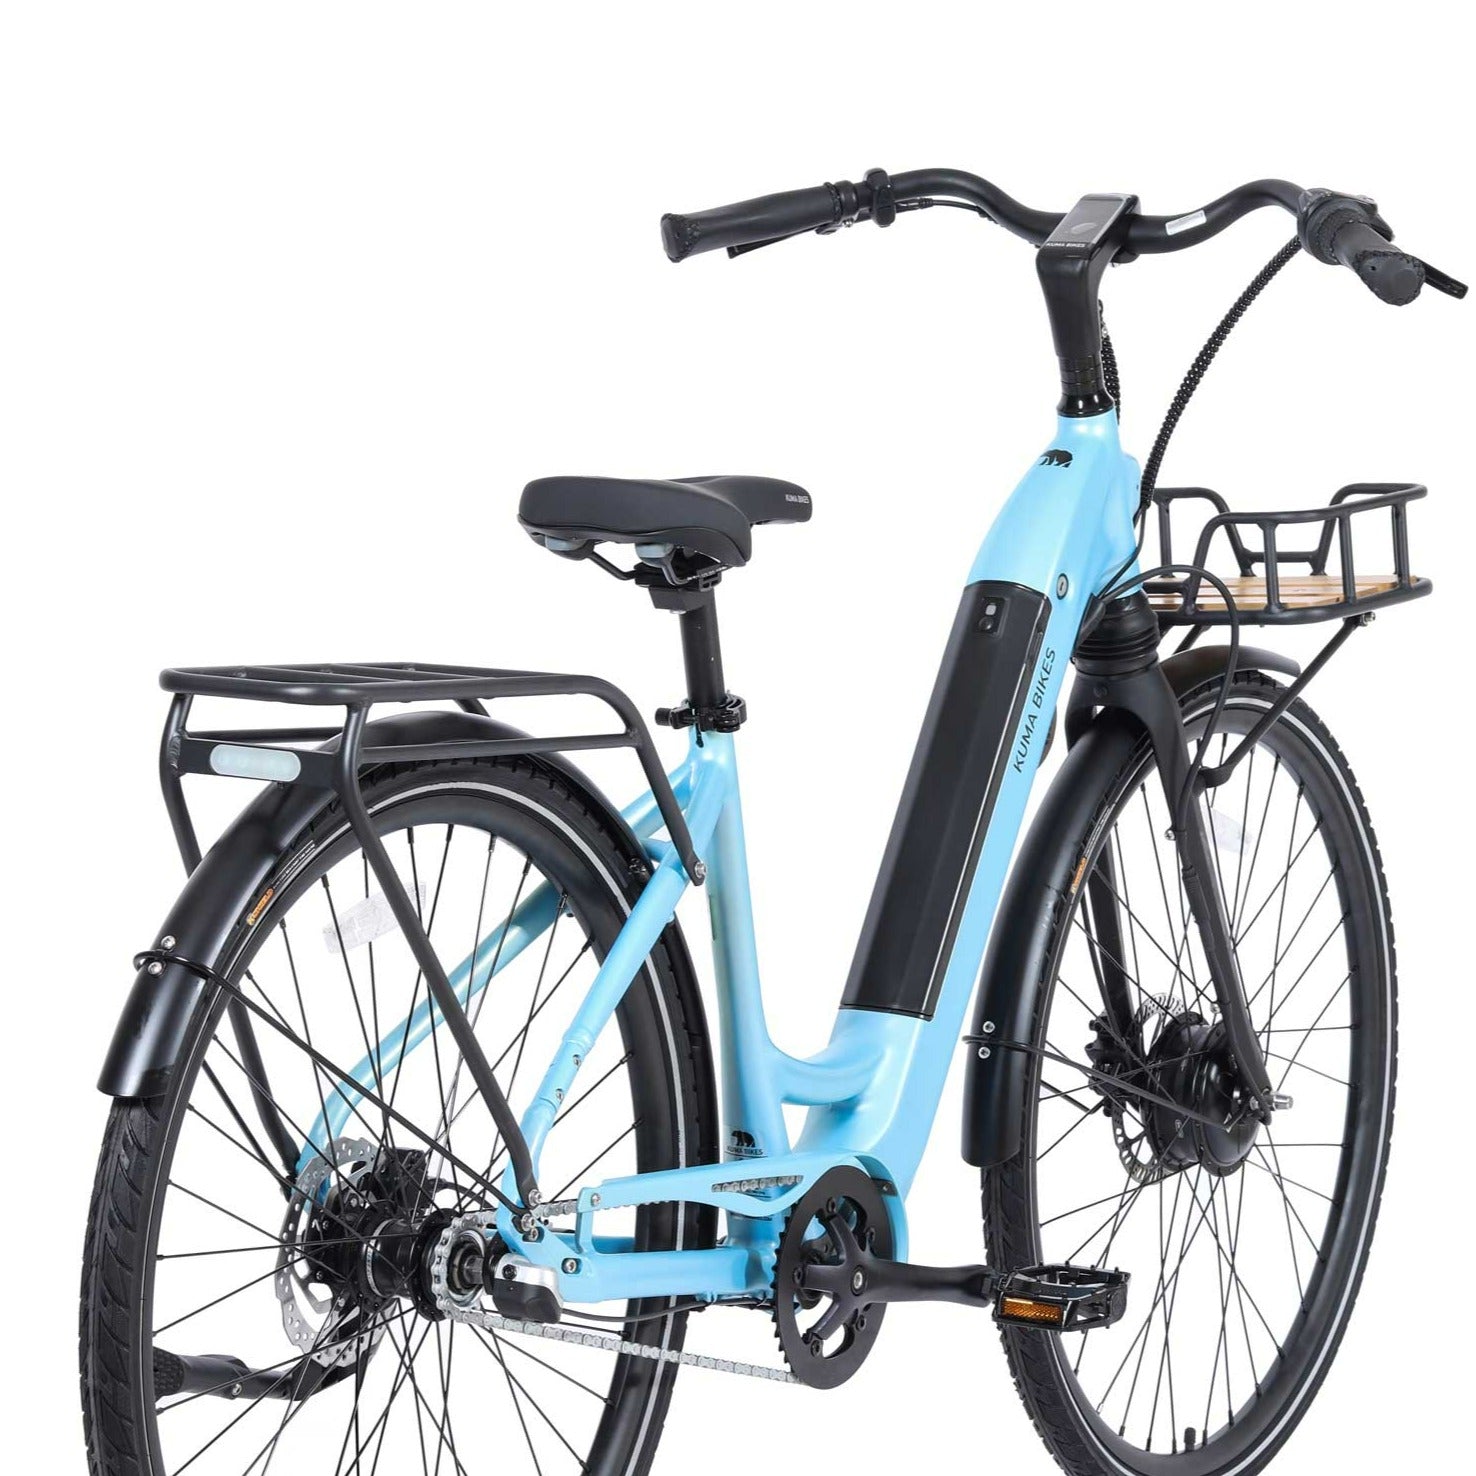 A product image of the Kuma S2 electric bike showing the rear & right side of the bike against a white background. The frame colour is Glacier Blue.